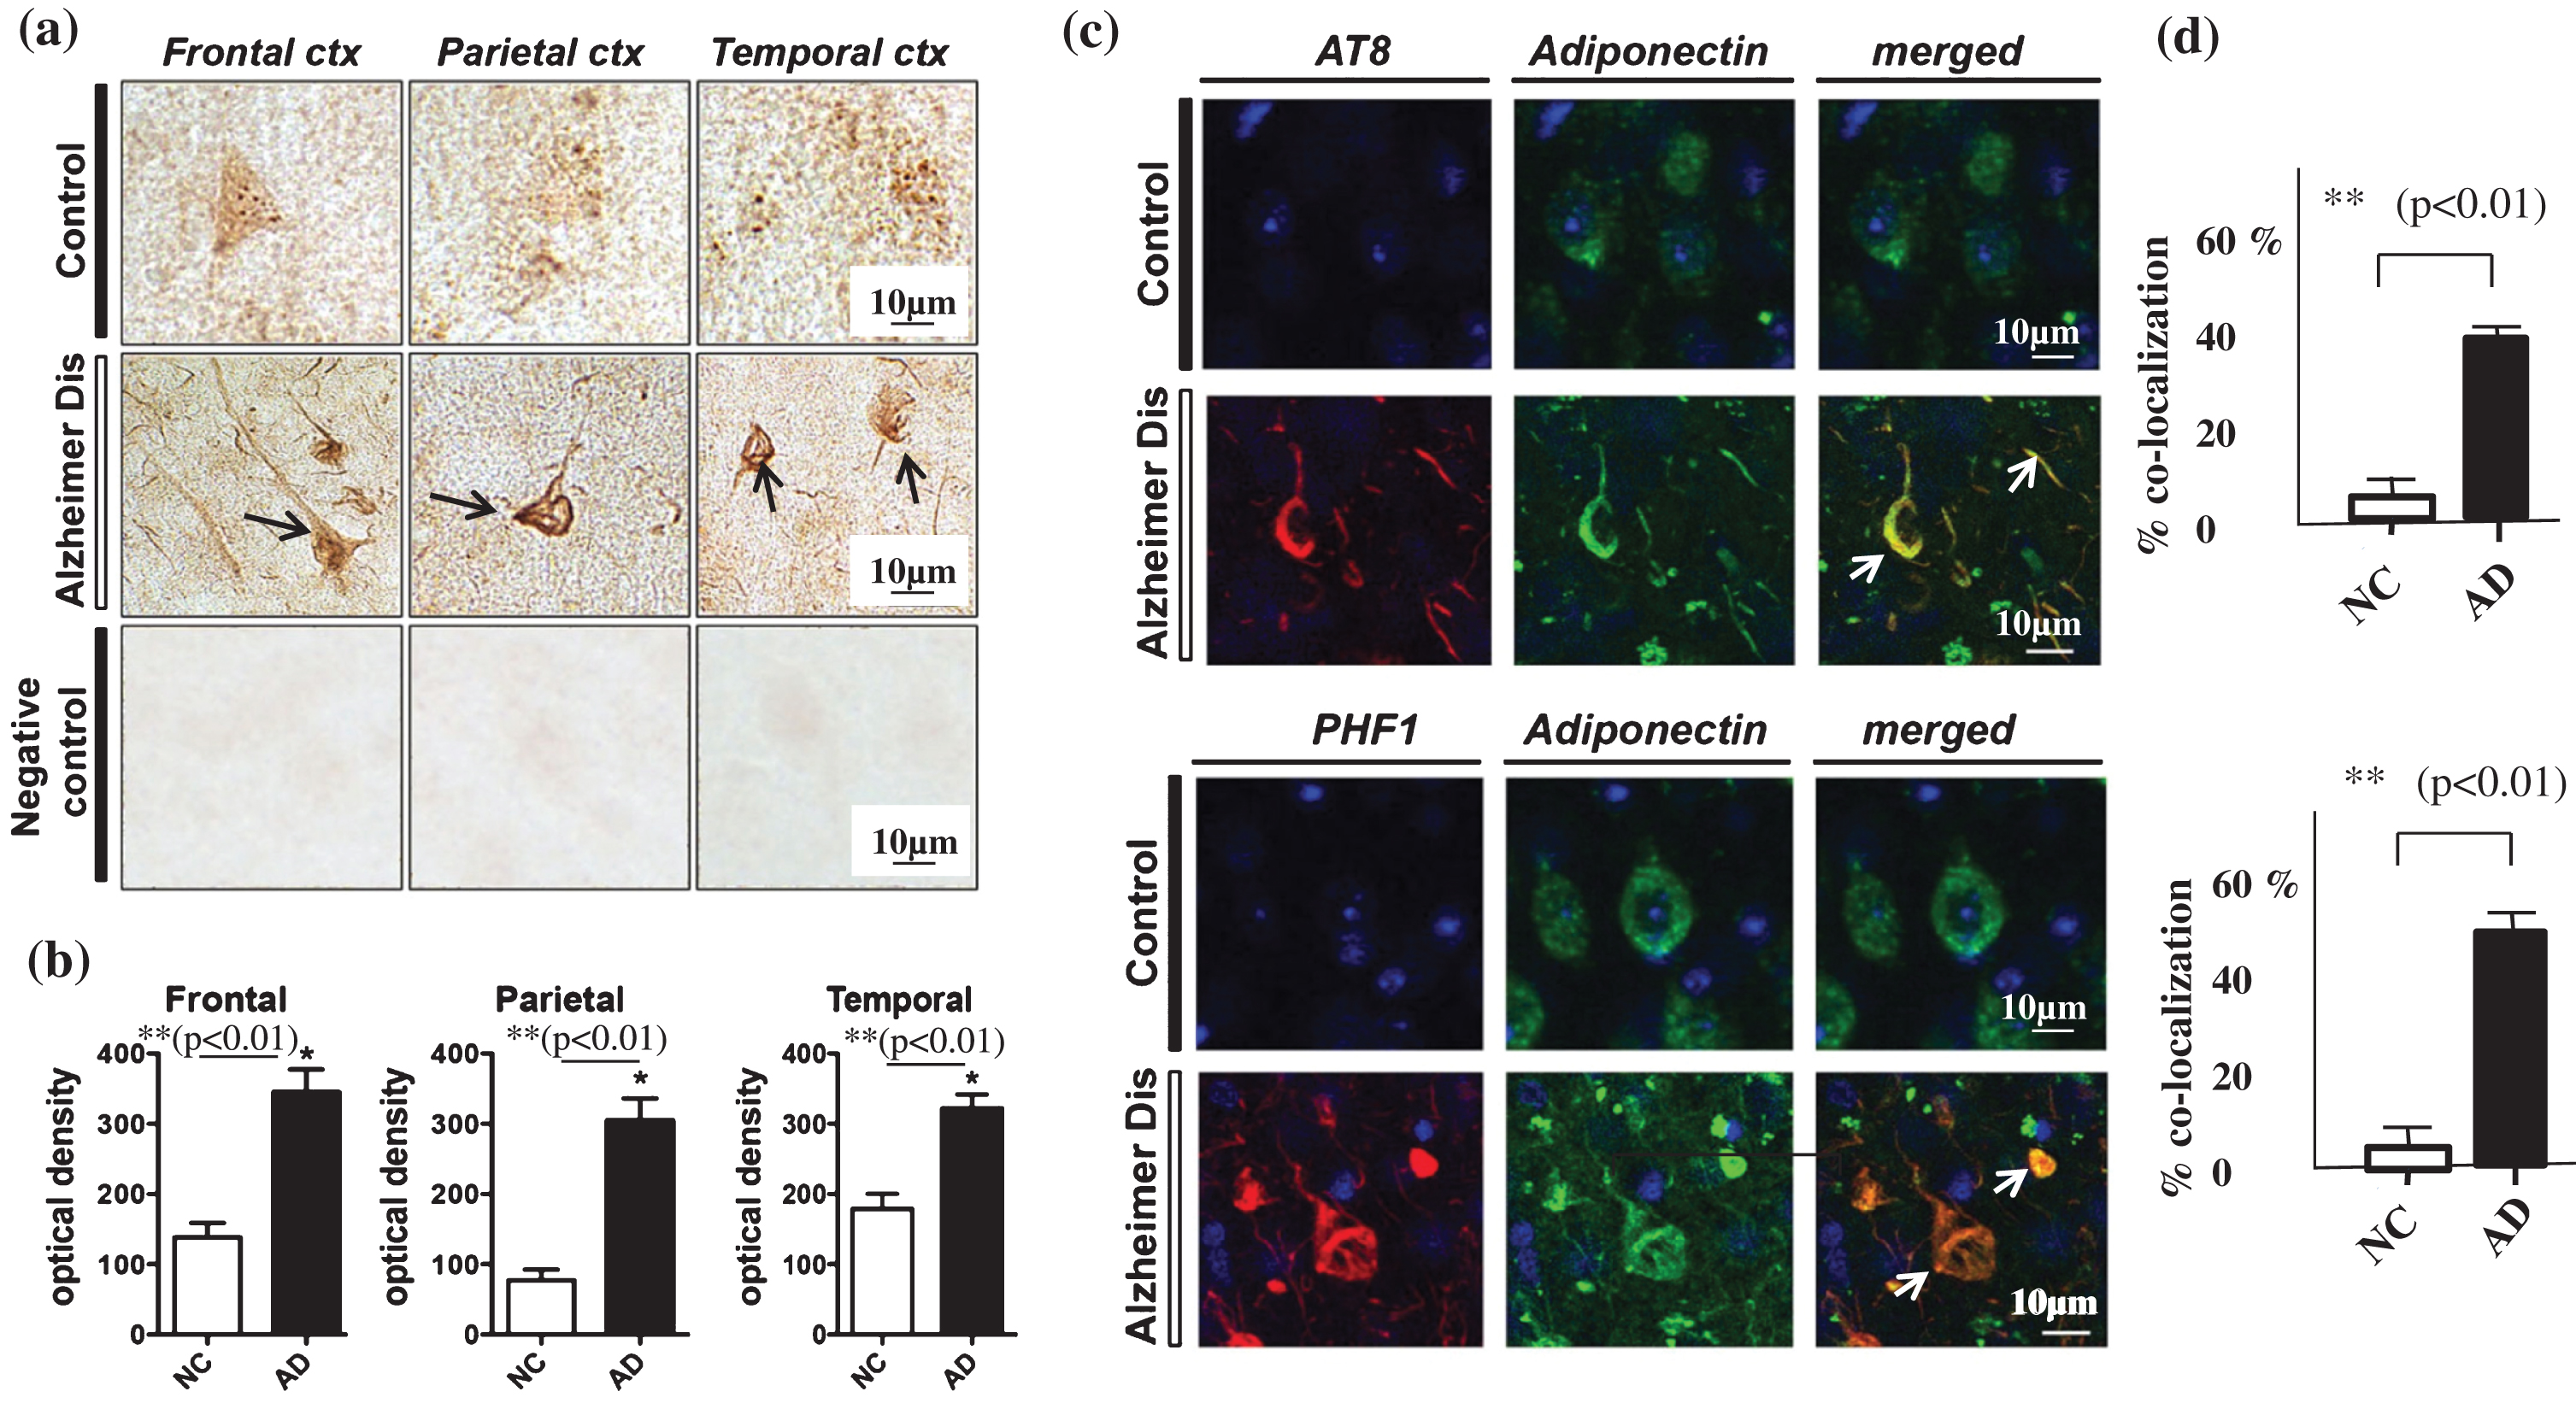 Neurohistochemistry using immunostaining with anti-APN antibody. a) Immunohistochemistry using a polyclonal anti-APN C-terminal antibody in samples from the frontal, parietal and temporal cortex showed strong staining of neurofibrillary tangles (NFTs) in AD brains (middle panel, black arrows), but not in control brains (upper panel). Negative control brain sections treated with secondary antibody without anti-APN antibody showed no staining, indicating the specificity of the anti-APN antibody (lower panel). b) Quantification using Image J showed that the optical density of APN-positive NFTs in (a) was significantly higher in AD brains compared to control brains (p < 0.01). c) Confocal laser scanning microscopy of control and AD brains using anti-tau antibodies AT8 (upper) and PHF (lower), and anti-APN antibody showed that APN co-localized with tau in AD. White arrows indicate NFTs identified by the presence of AT8 or PHF-1 immunoreactive abnormal fibrous inclusions, which were within the perikaryal cytoplasm of neurons. d) Quantification with Image J showed that co-localization of APN with NFTs was significantly higher in AD brains than in control brains (p < 0.01). Scale bar = 10 μm.